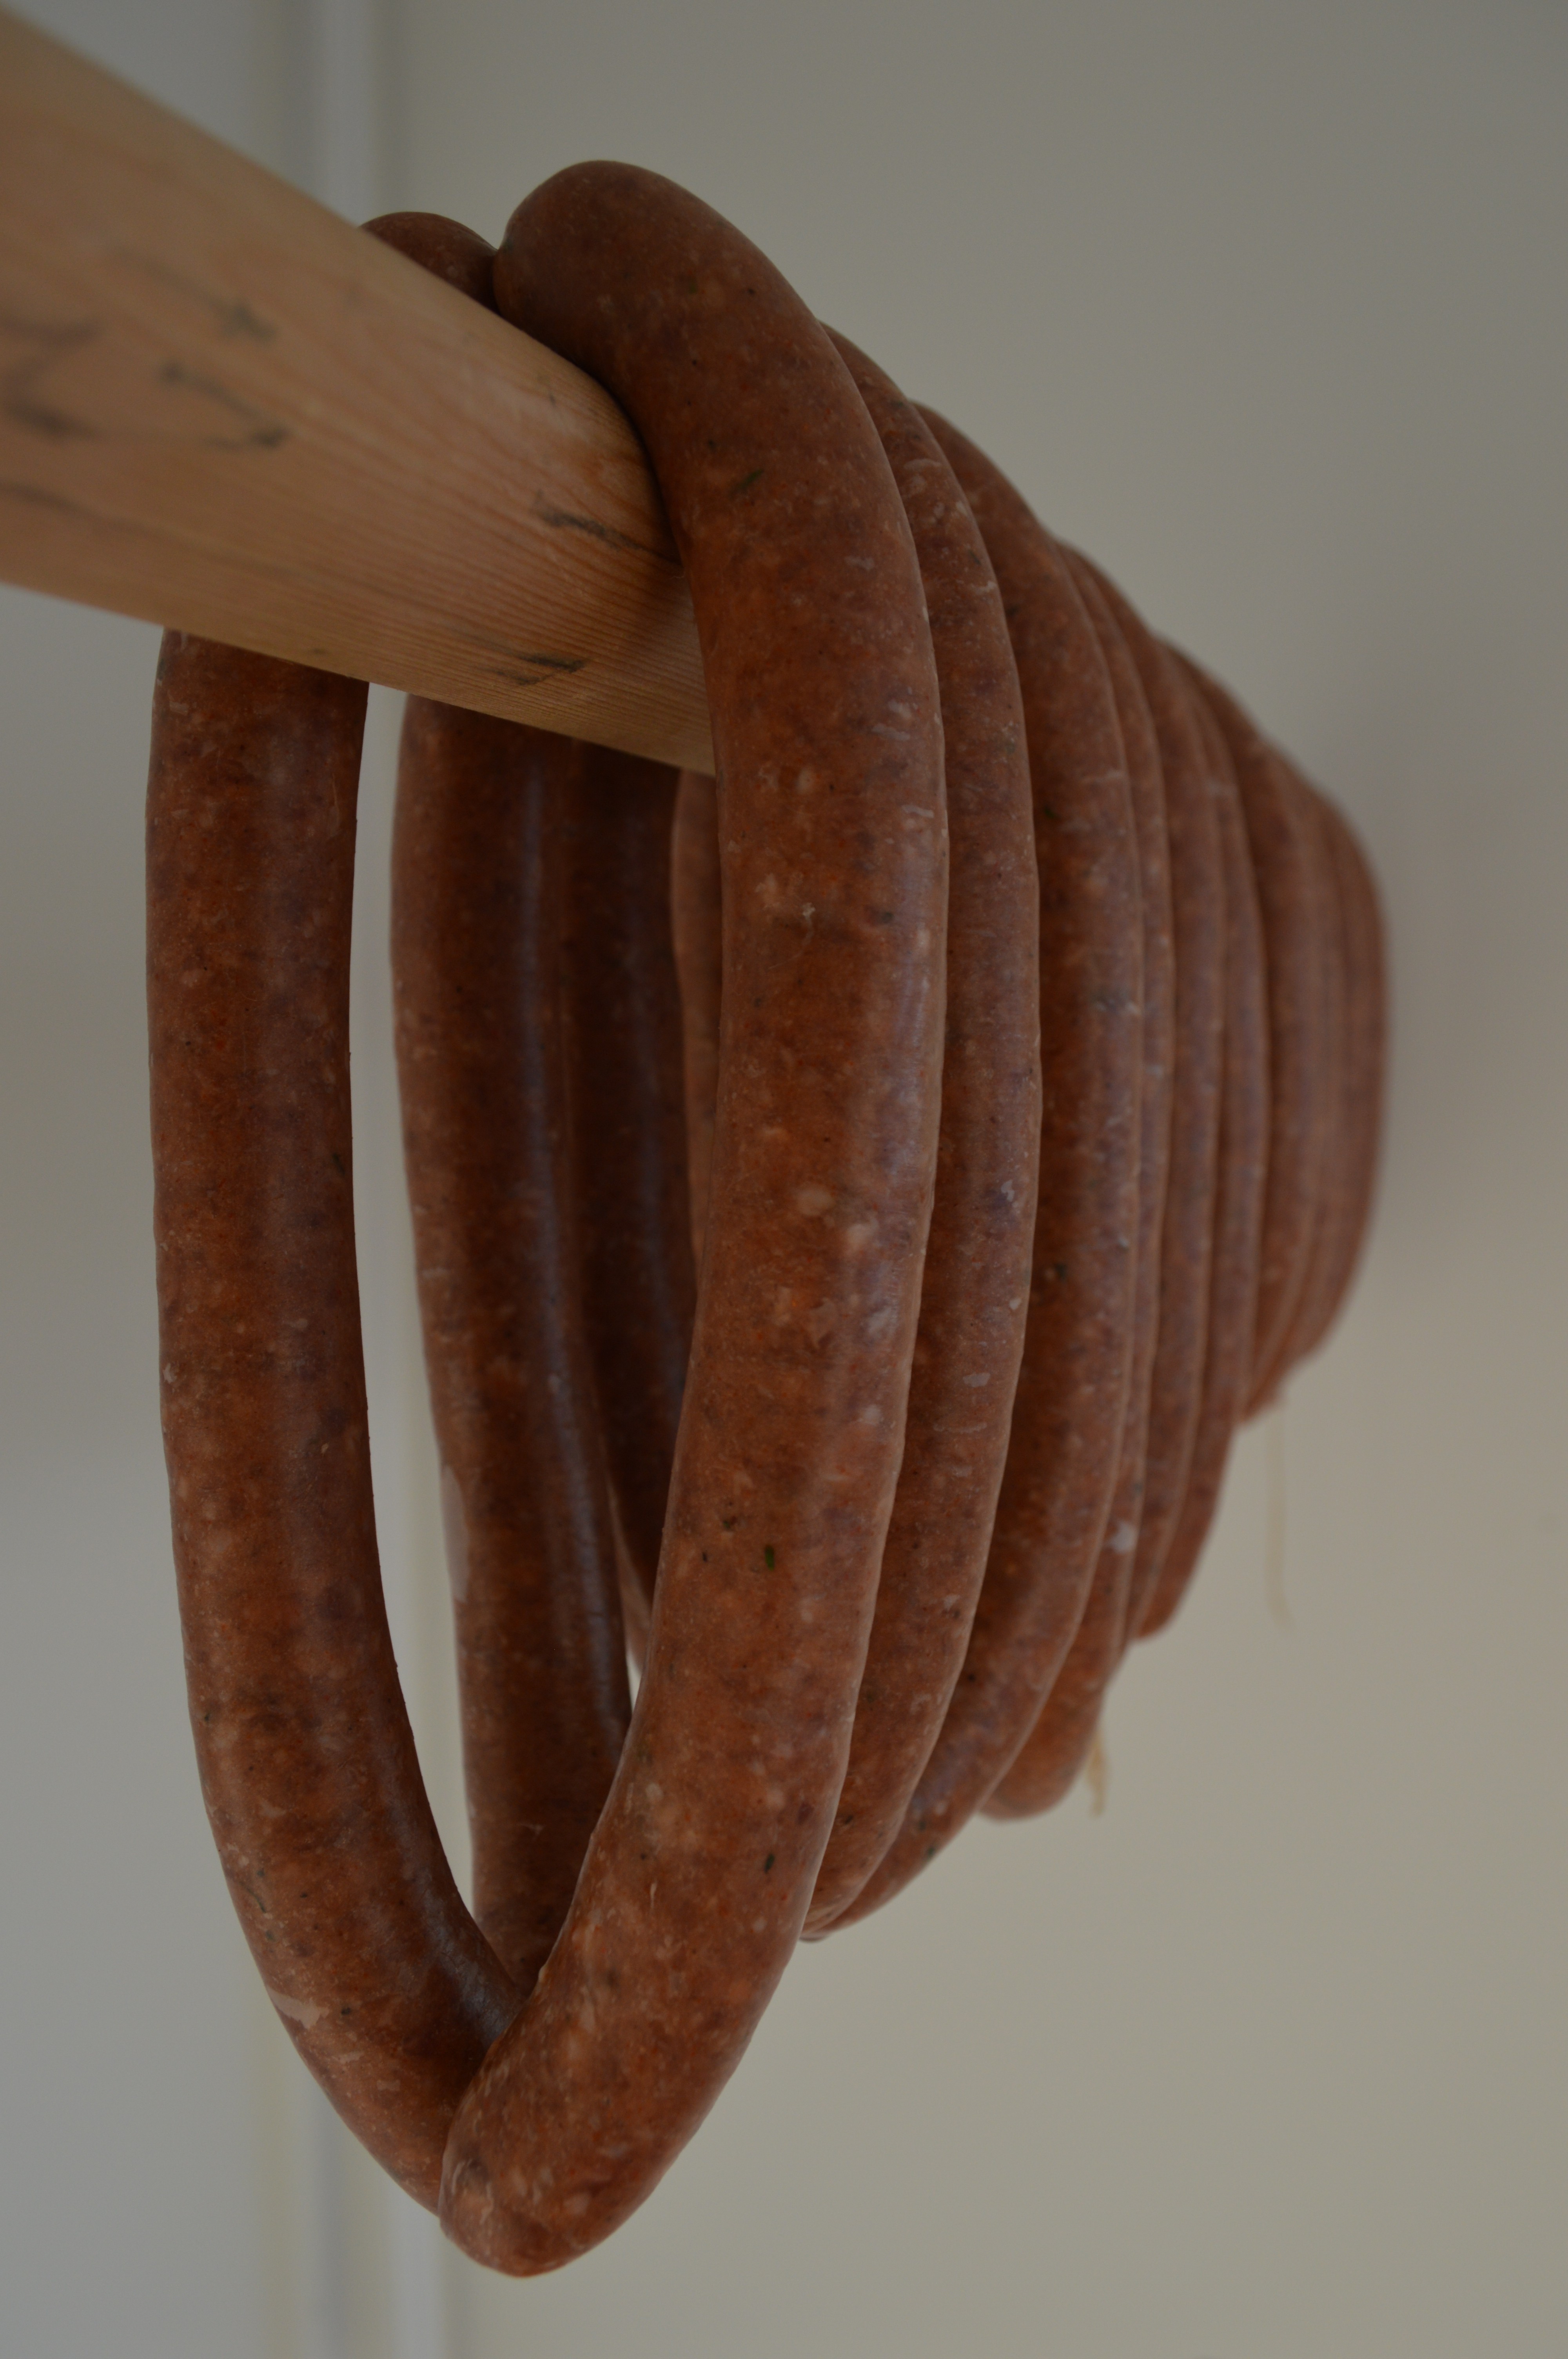 Spicy lamb sausages hanging on a wooden dowel.